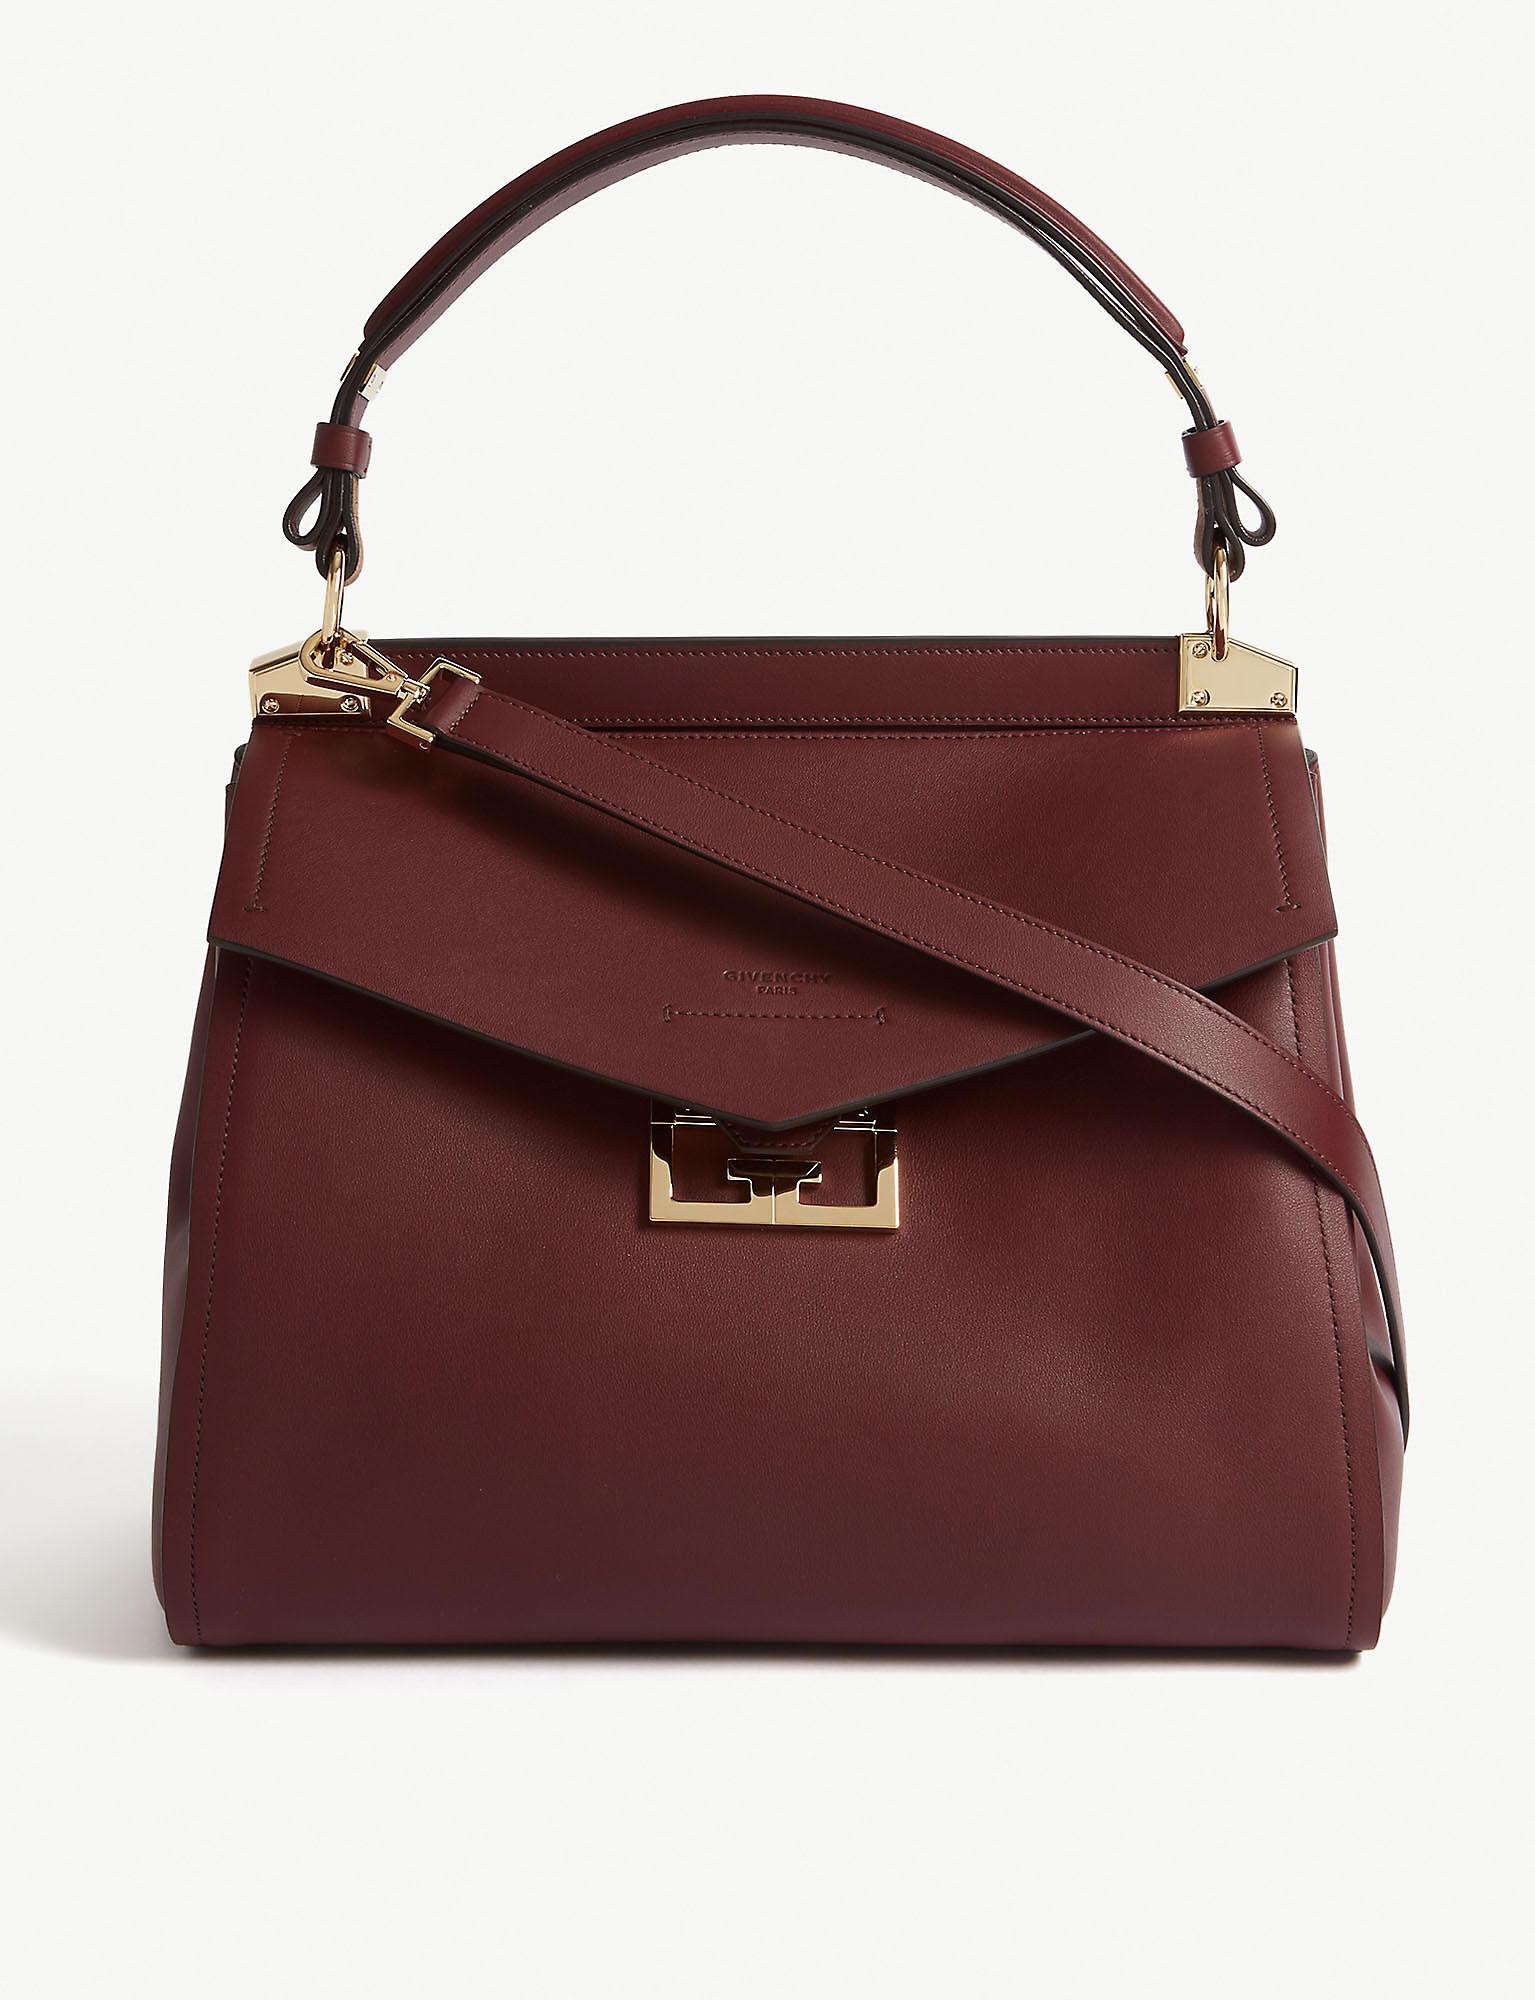 Givenchy Mystic Large Leather Top Handle Bag in Purple - Lyst